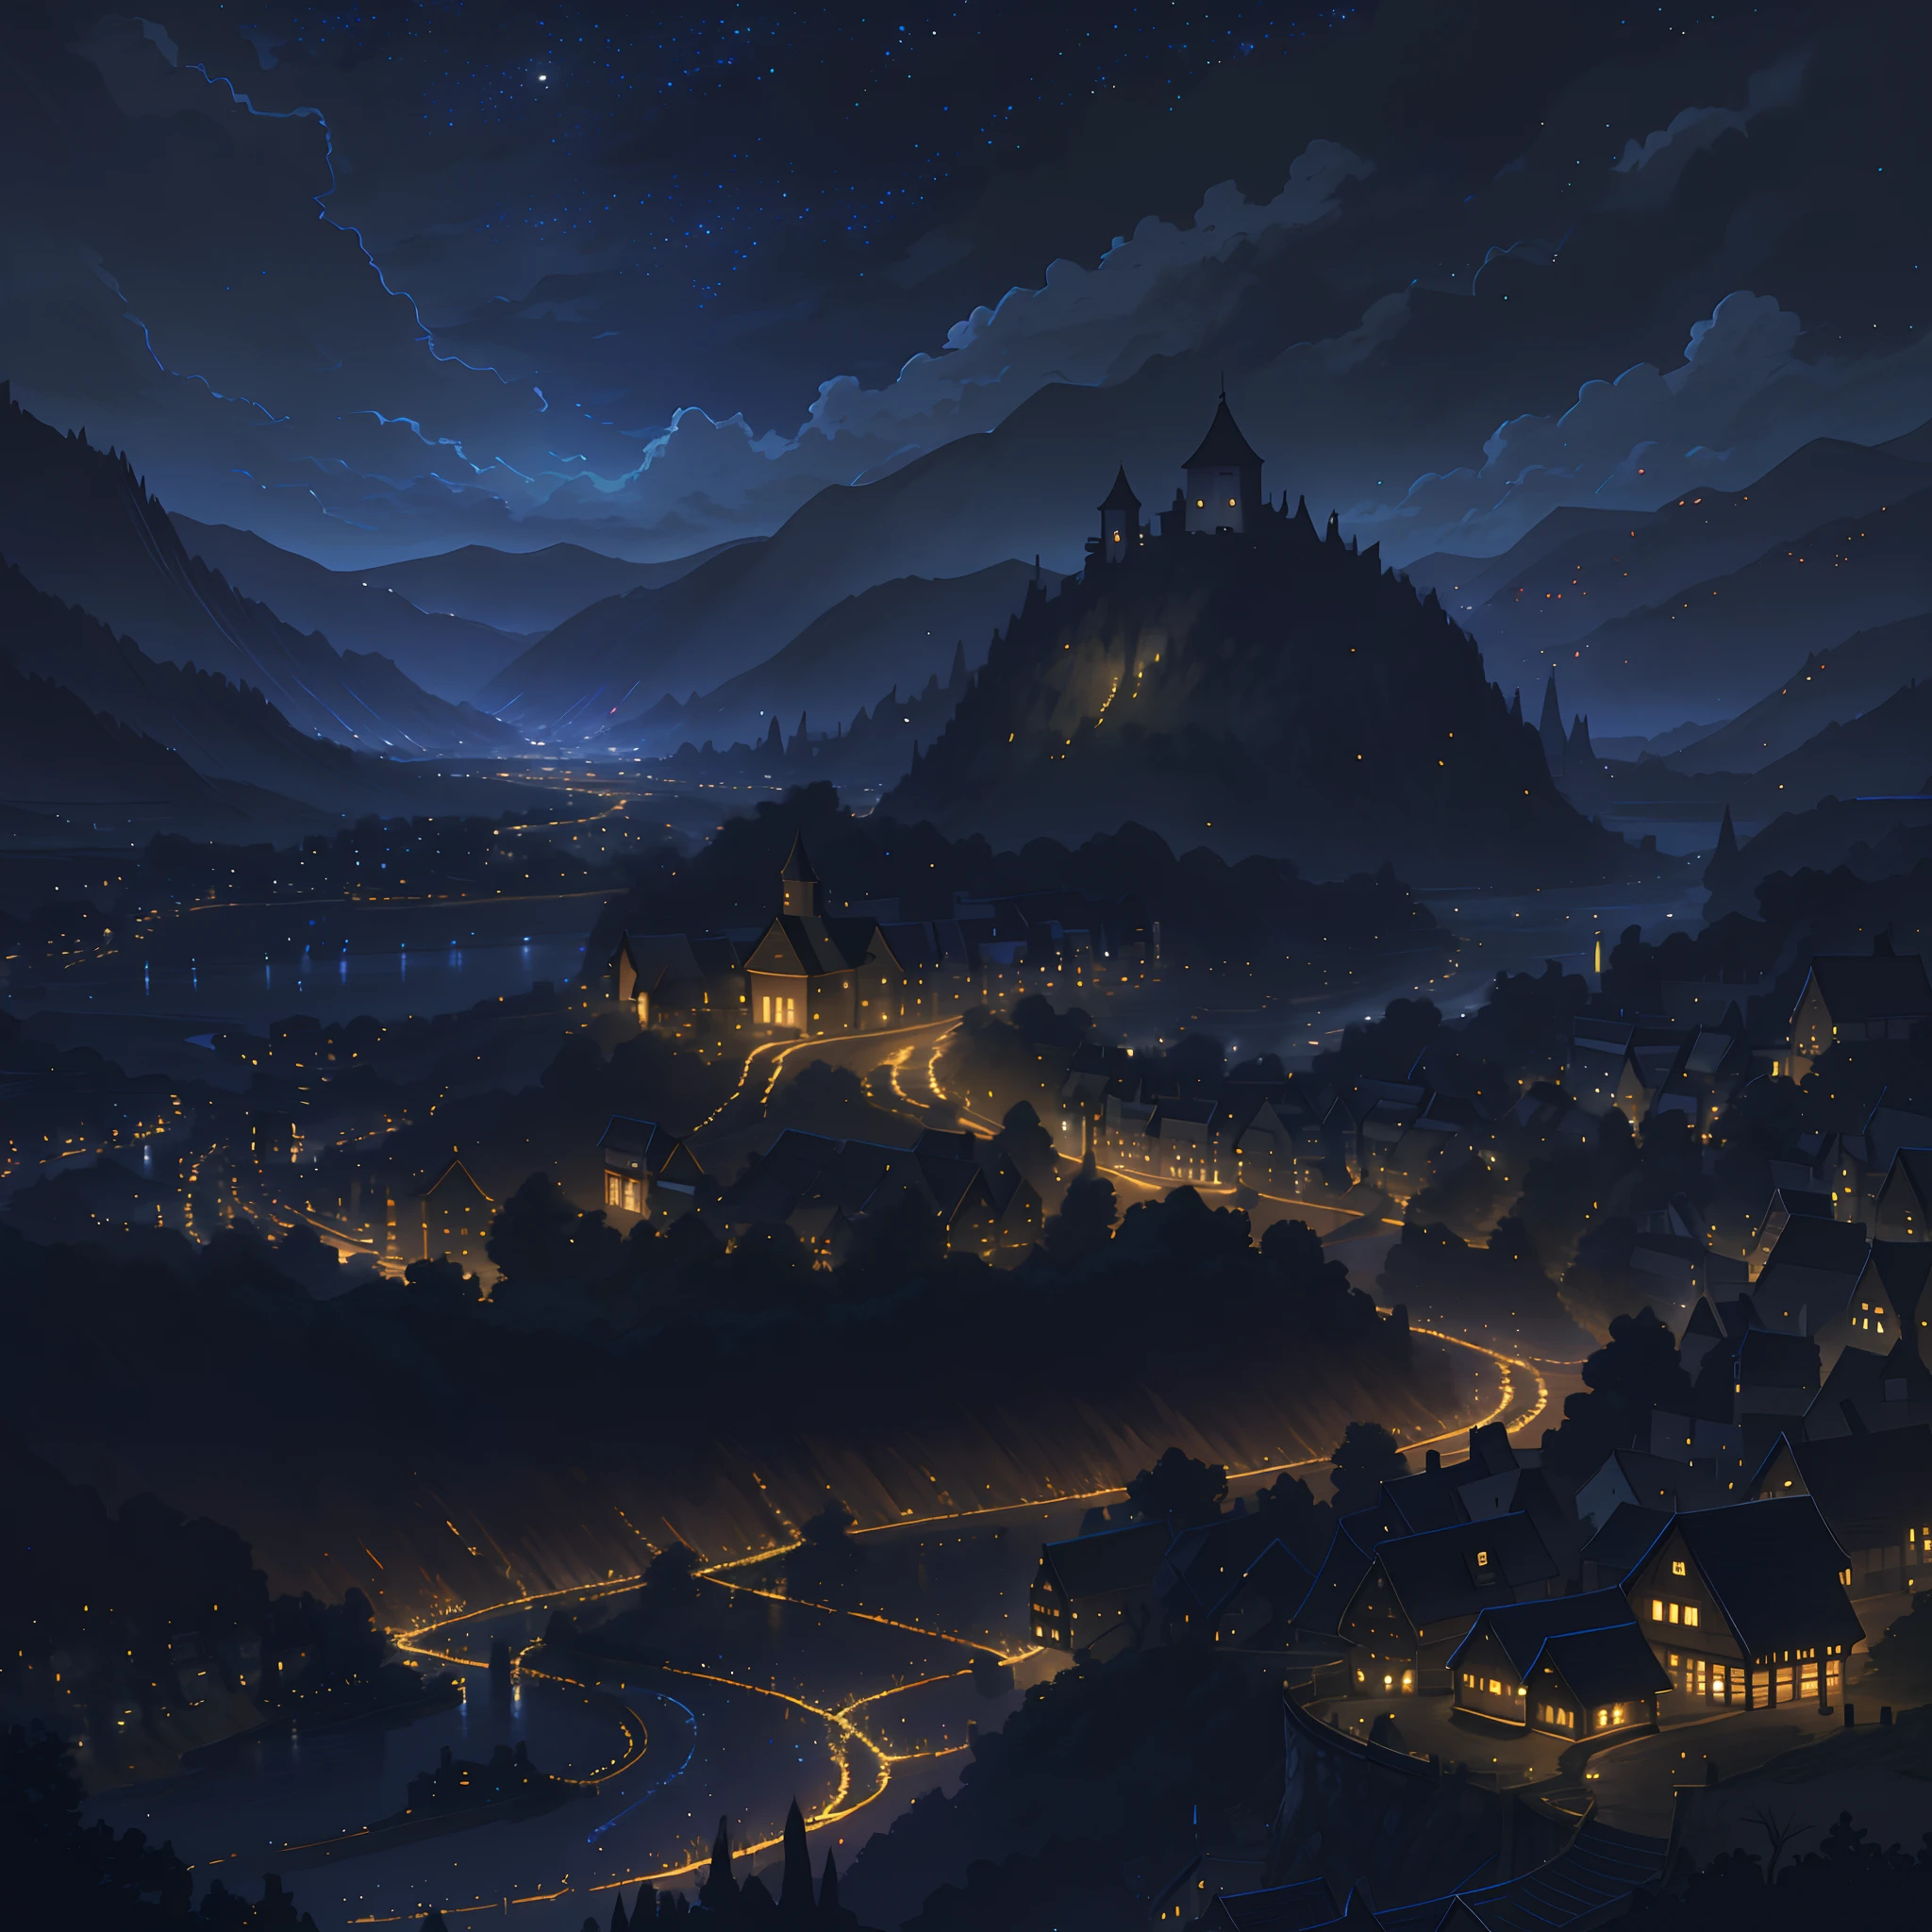 night scene with a village and a river in the foreground, calm night. digital illustration, 4k highly detailed digital art, night scenery, anime art wallpaper 4k, anime art wallpaper 4 k, 4k detailed digital art, nighttime nature landscape, anime art wallpaper 8 k, background artwork, beautiful art uhd 4 k, 4 k hd illustrative wallpaper